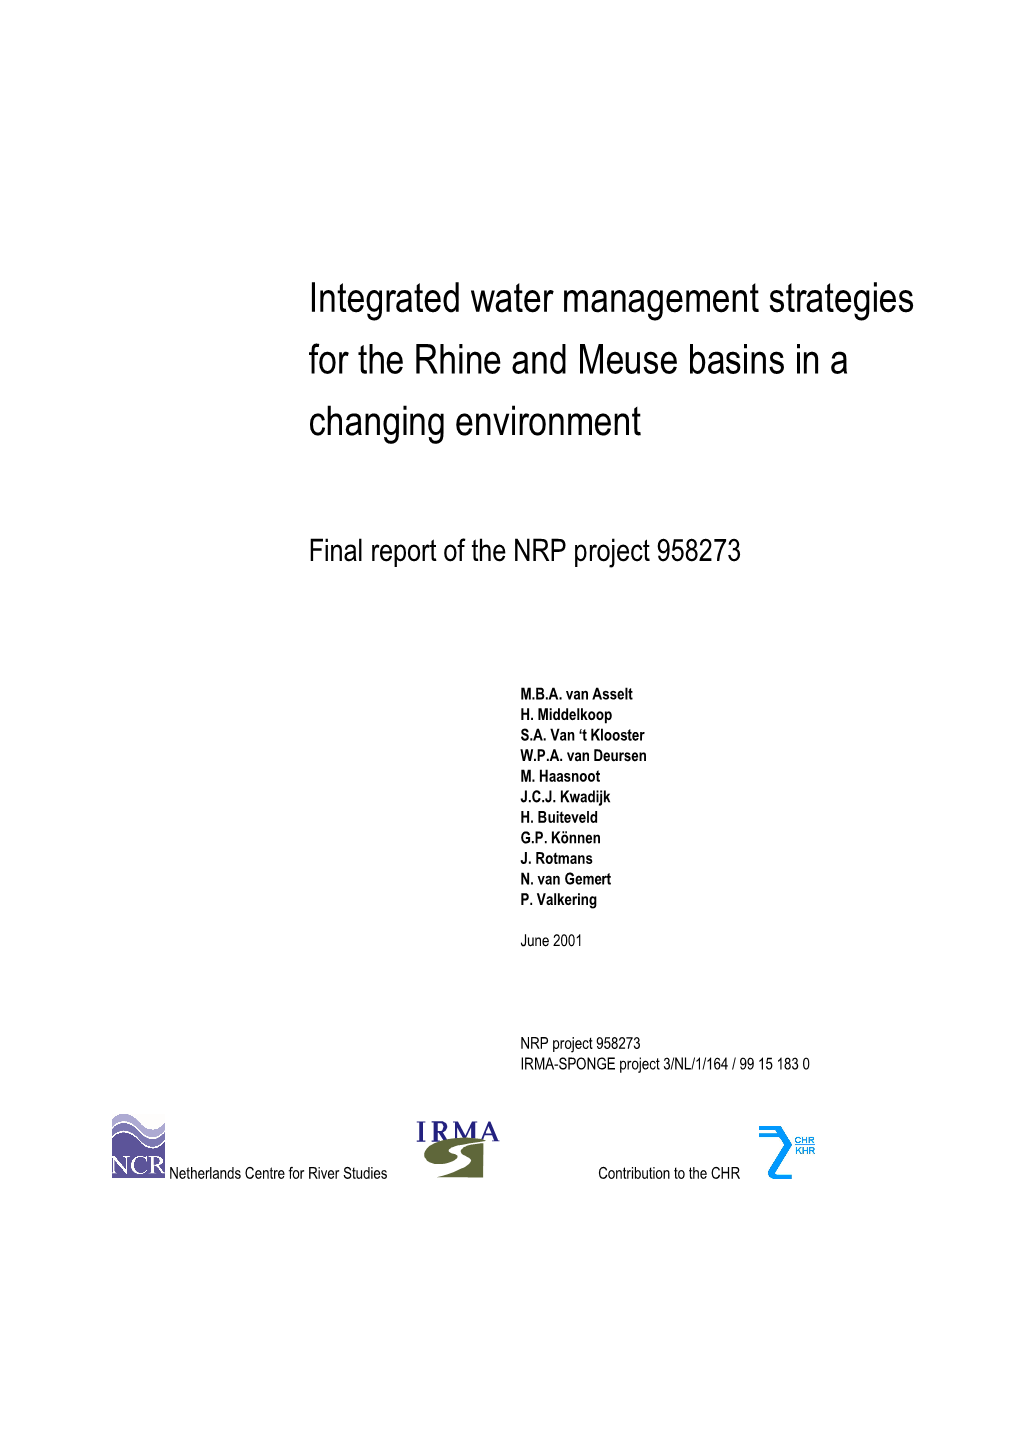 Integrated Water Management Strategies for the Rhine and Meuse Basins in a Changing Environment